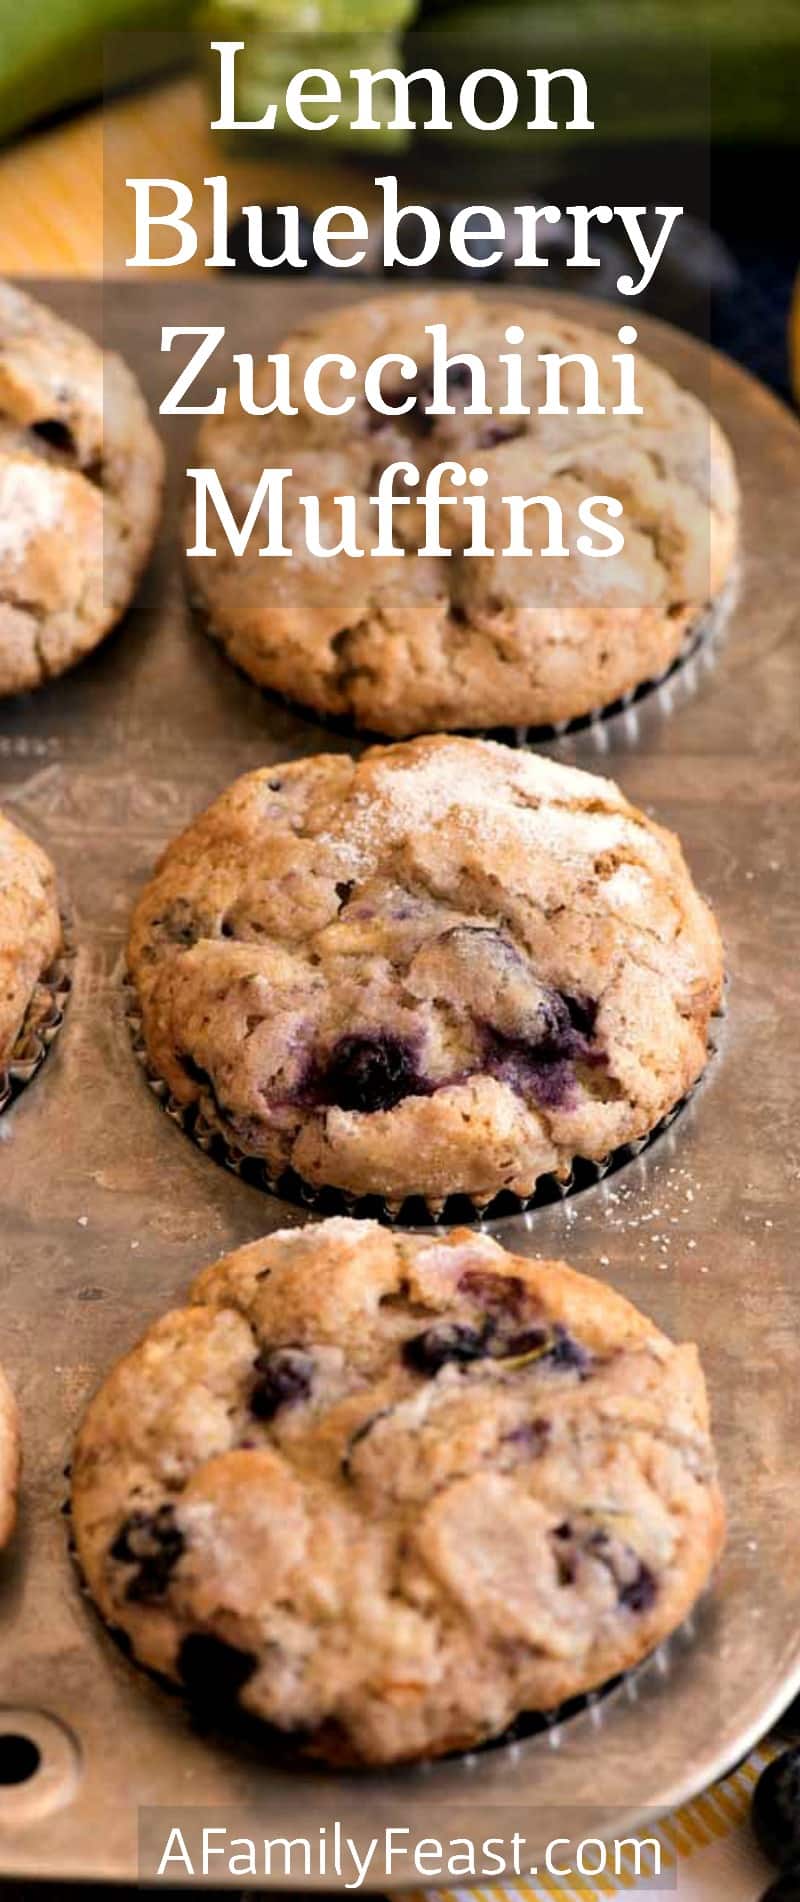 These Lemon Blueberry Zucchini Muffins are the ultimate summer muffin recipe!